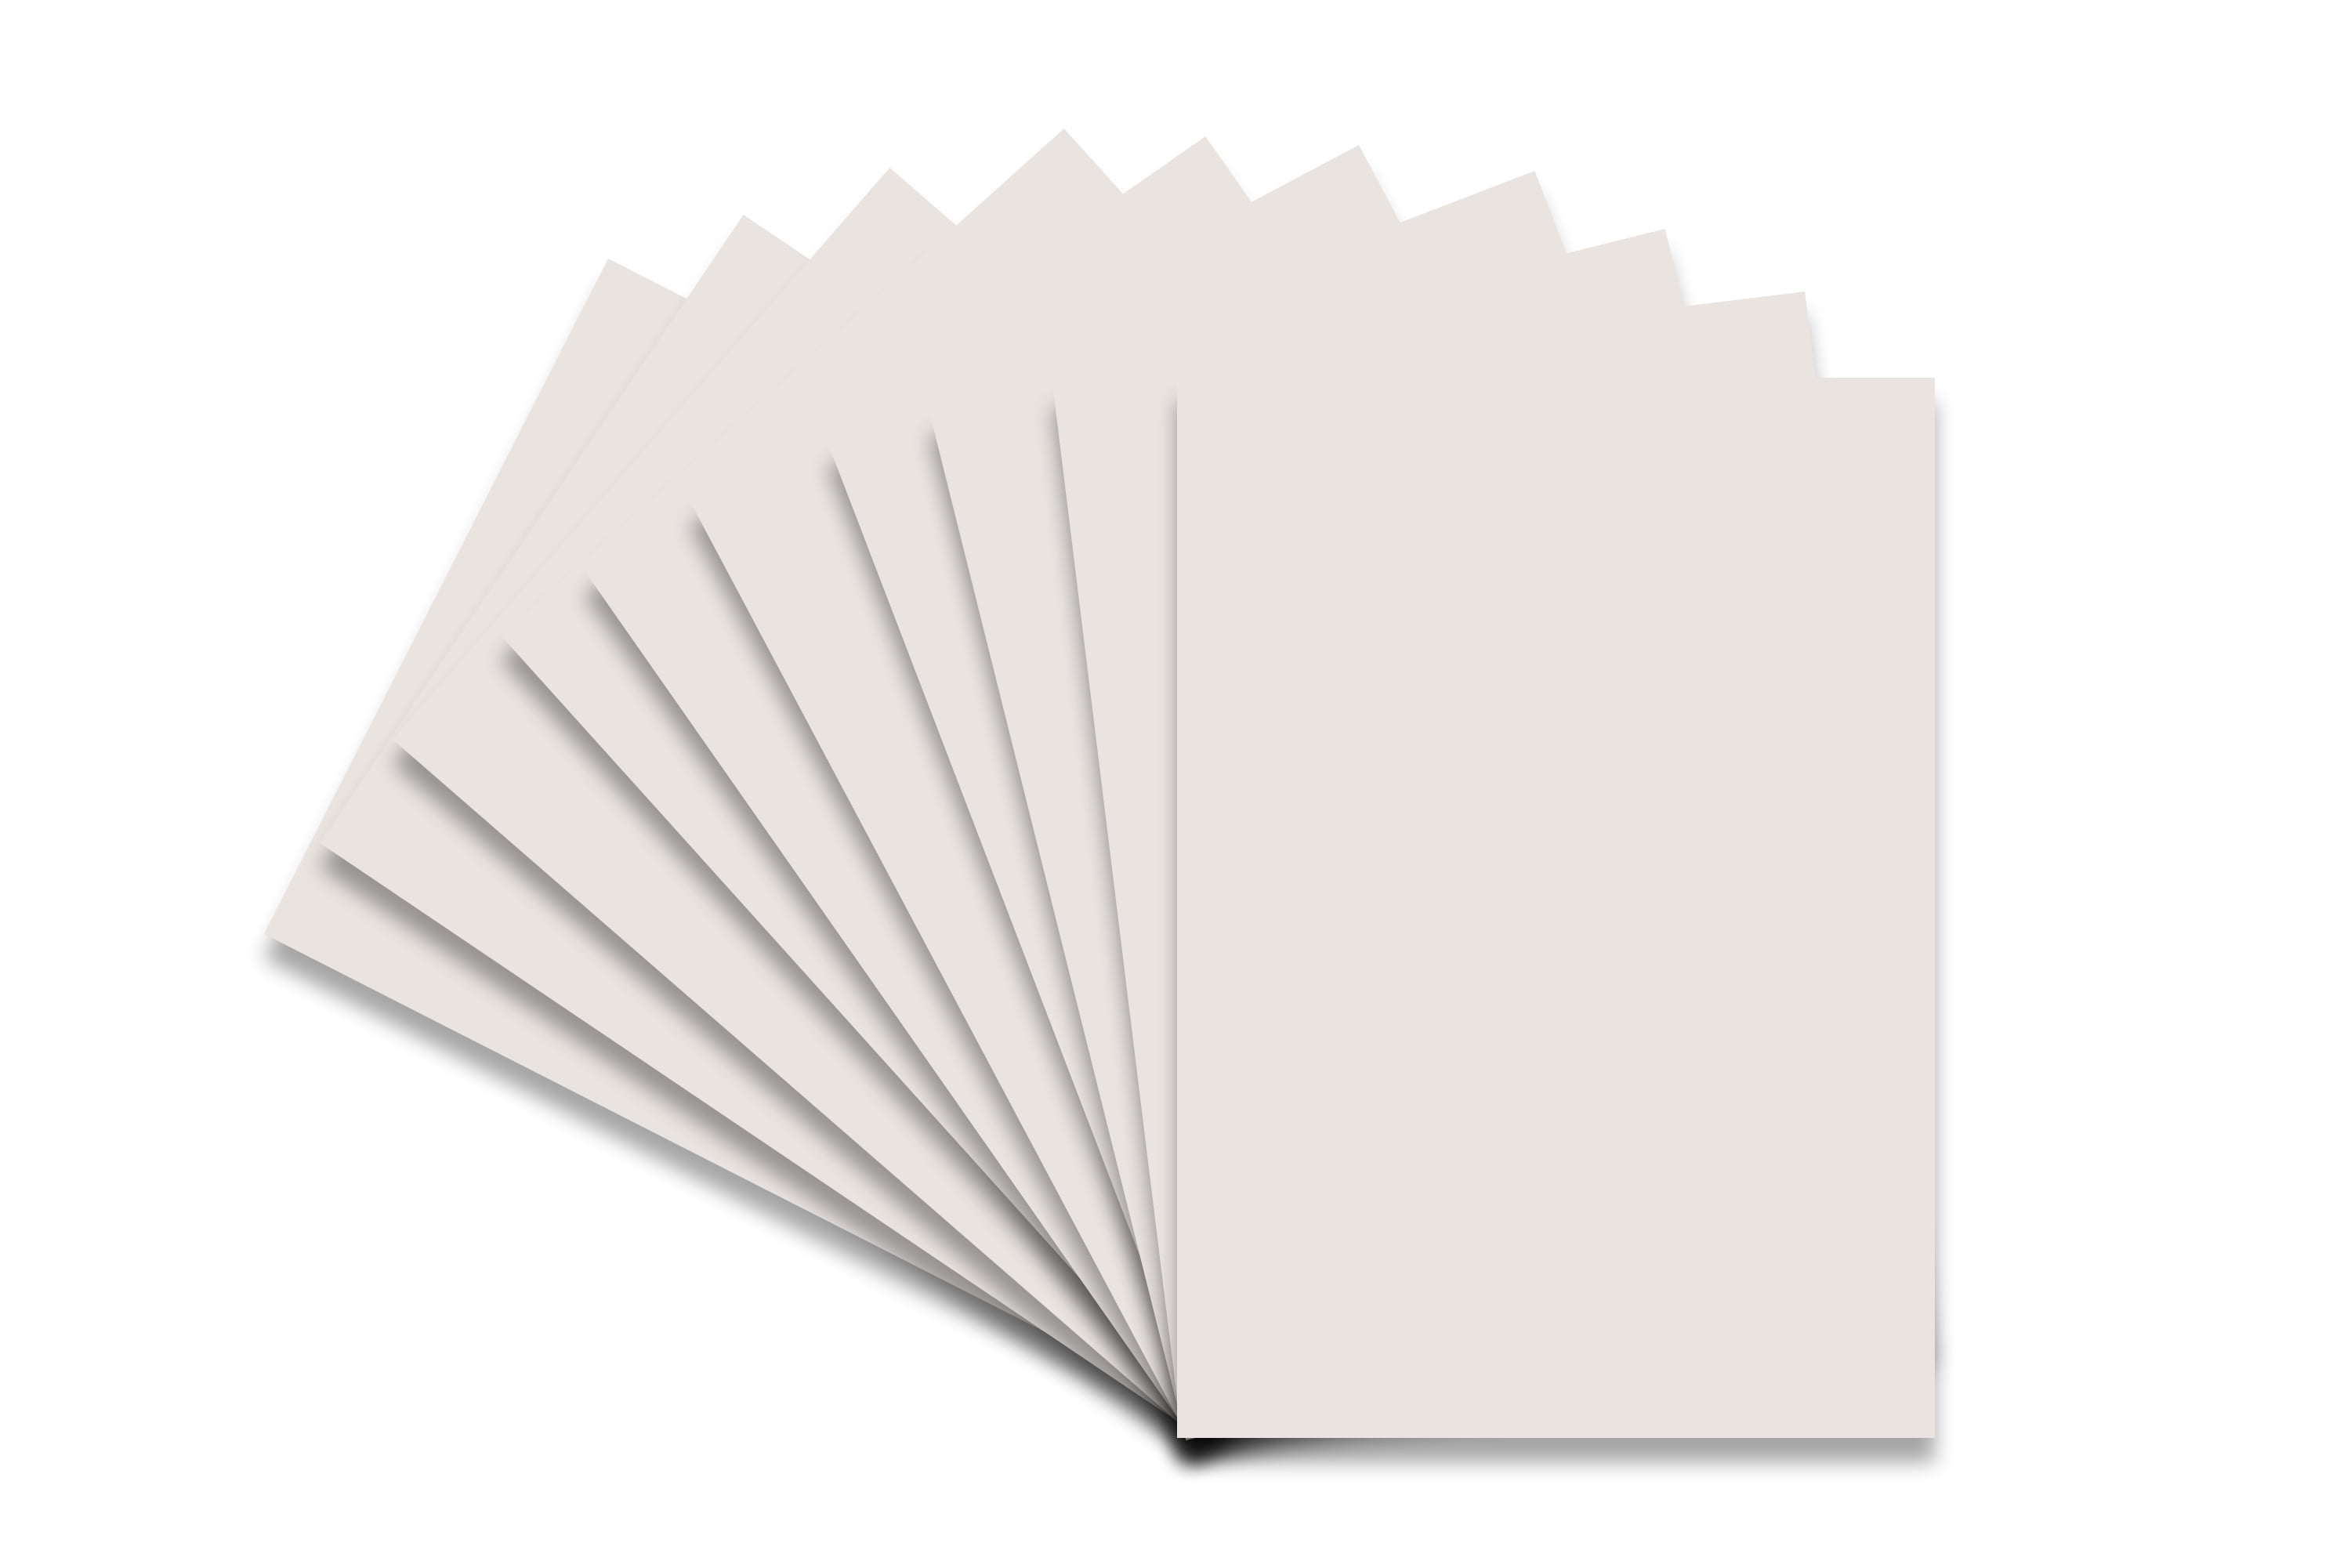  Mat Board Center, Pack of 10, 18x24 Uncut White Color